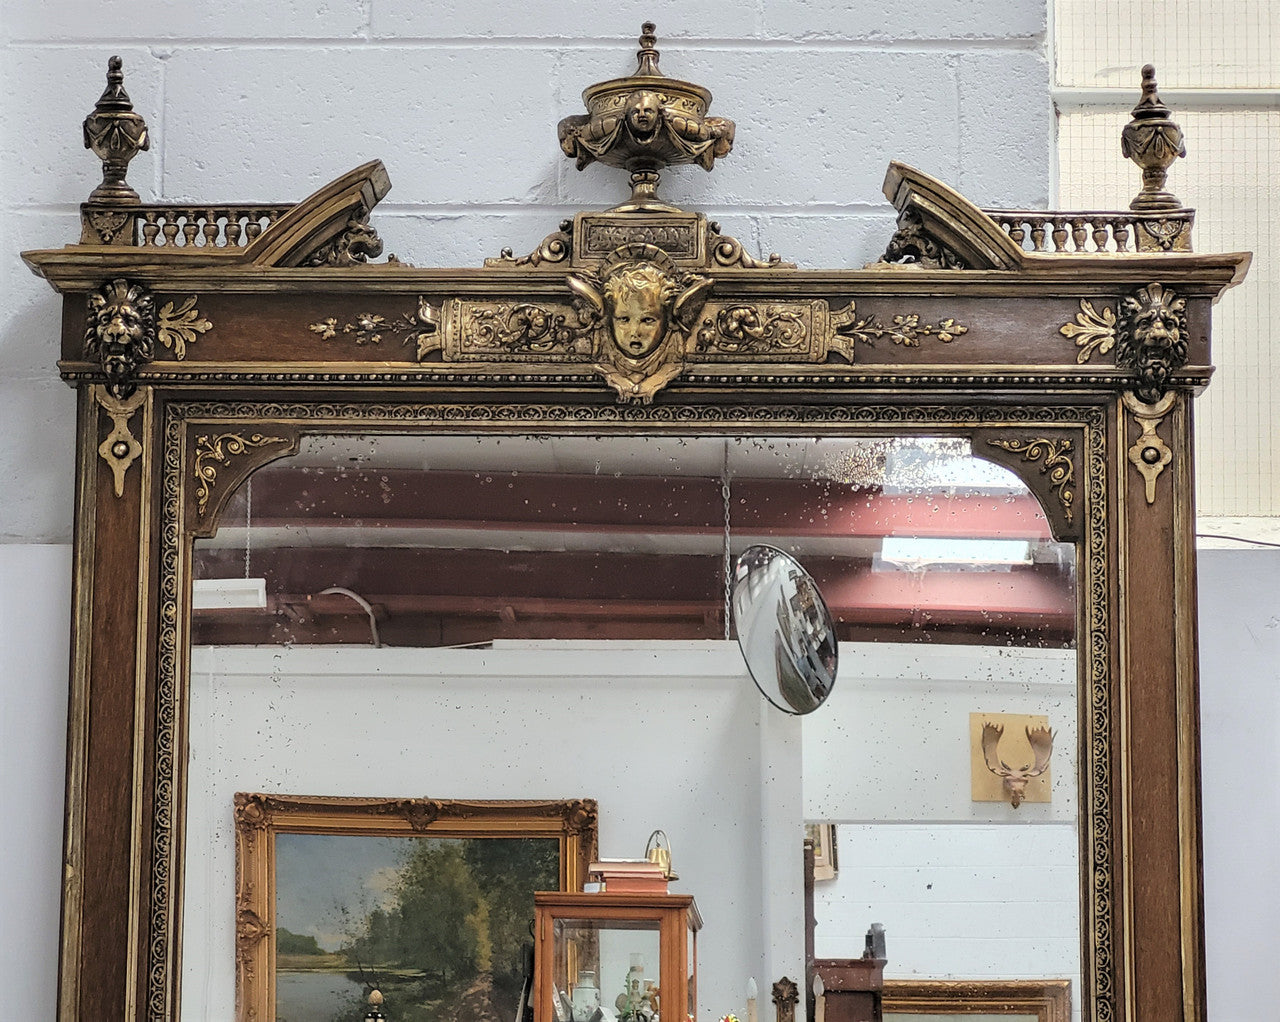 Early 19th Century French gilt and simulated wood mantel mirror. It still contains its original glass which contains loads of character. It is in very good detailed condition and has had minor restorations.